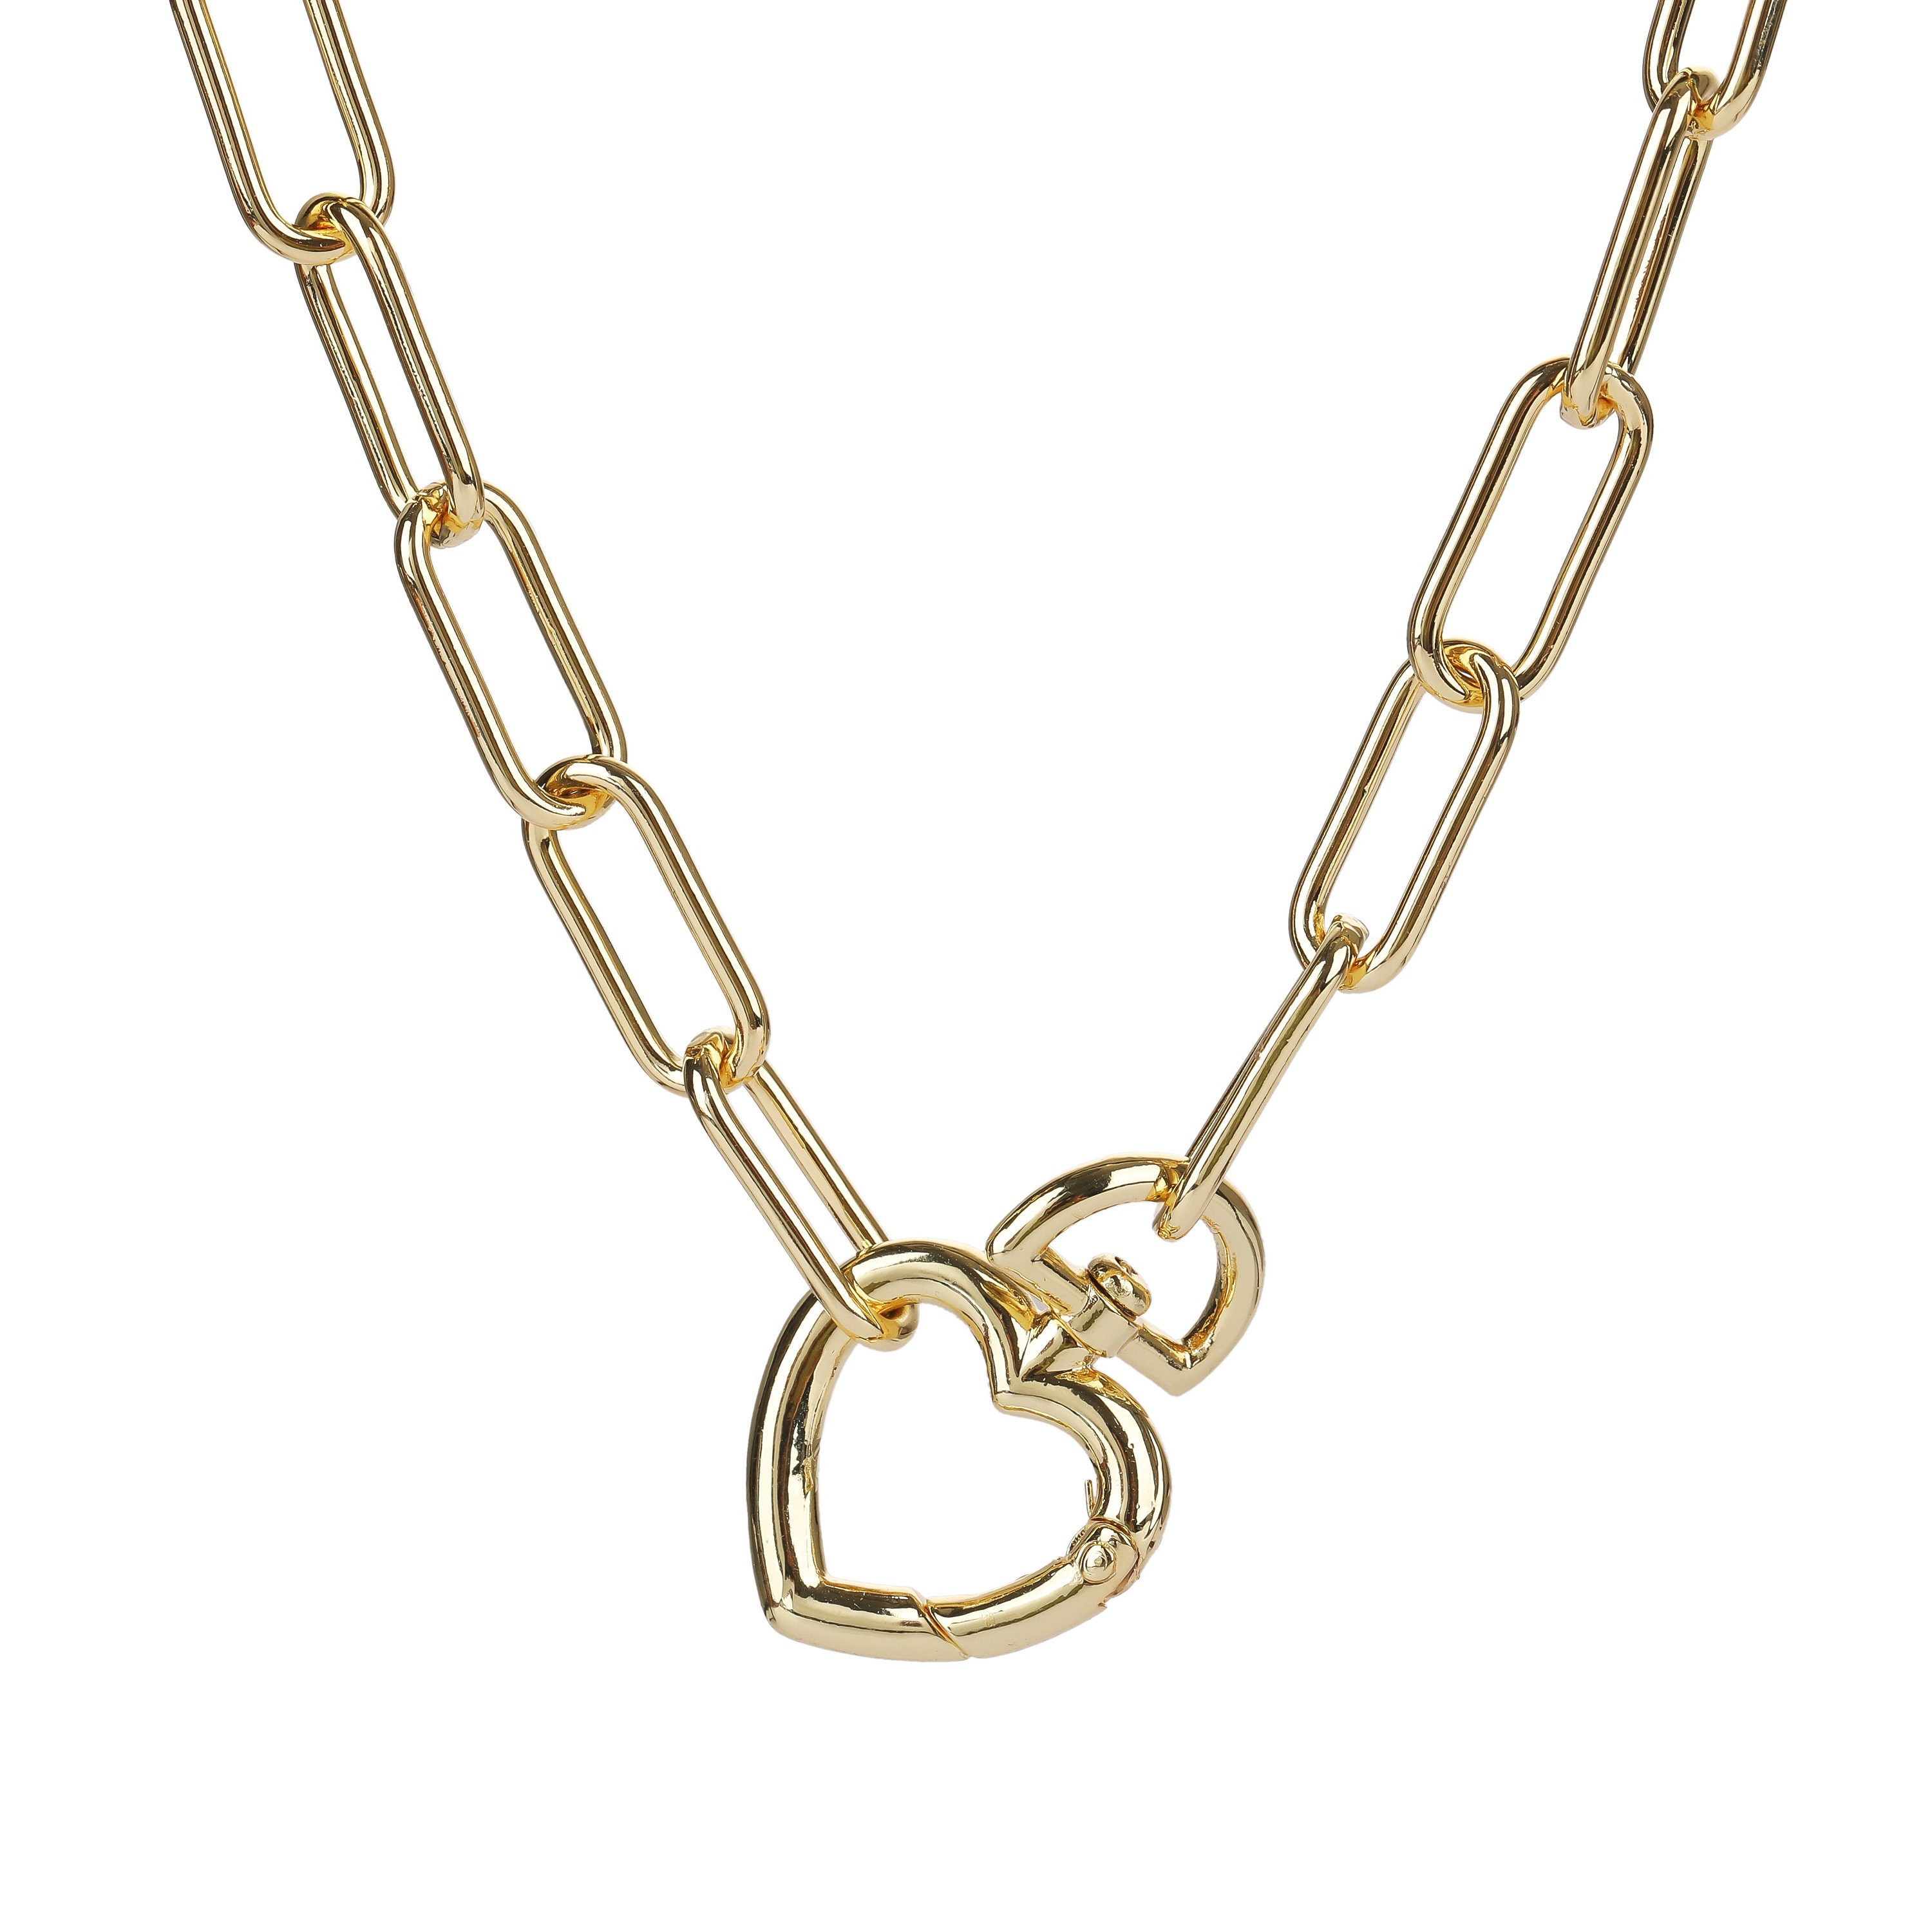 Paper Clip Link Necklace w/ Double Heart Charm Clasp in Yellow Plated  Sterling Silver- 16 in. - CBG003305